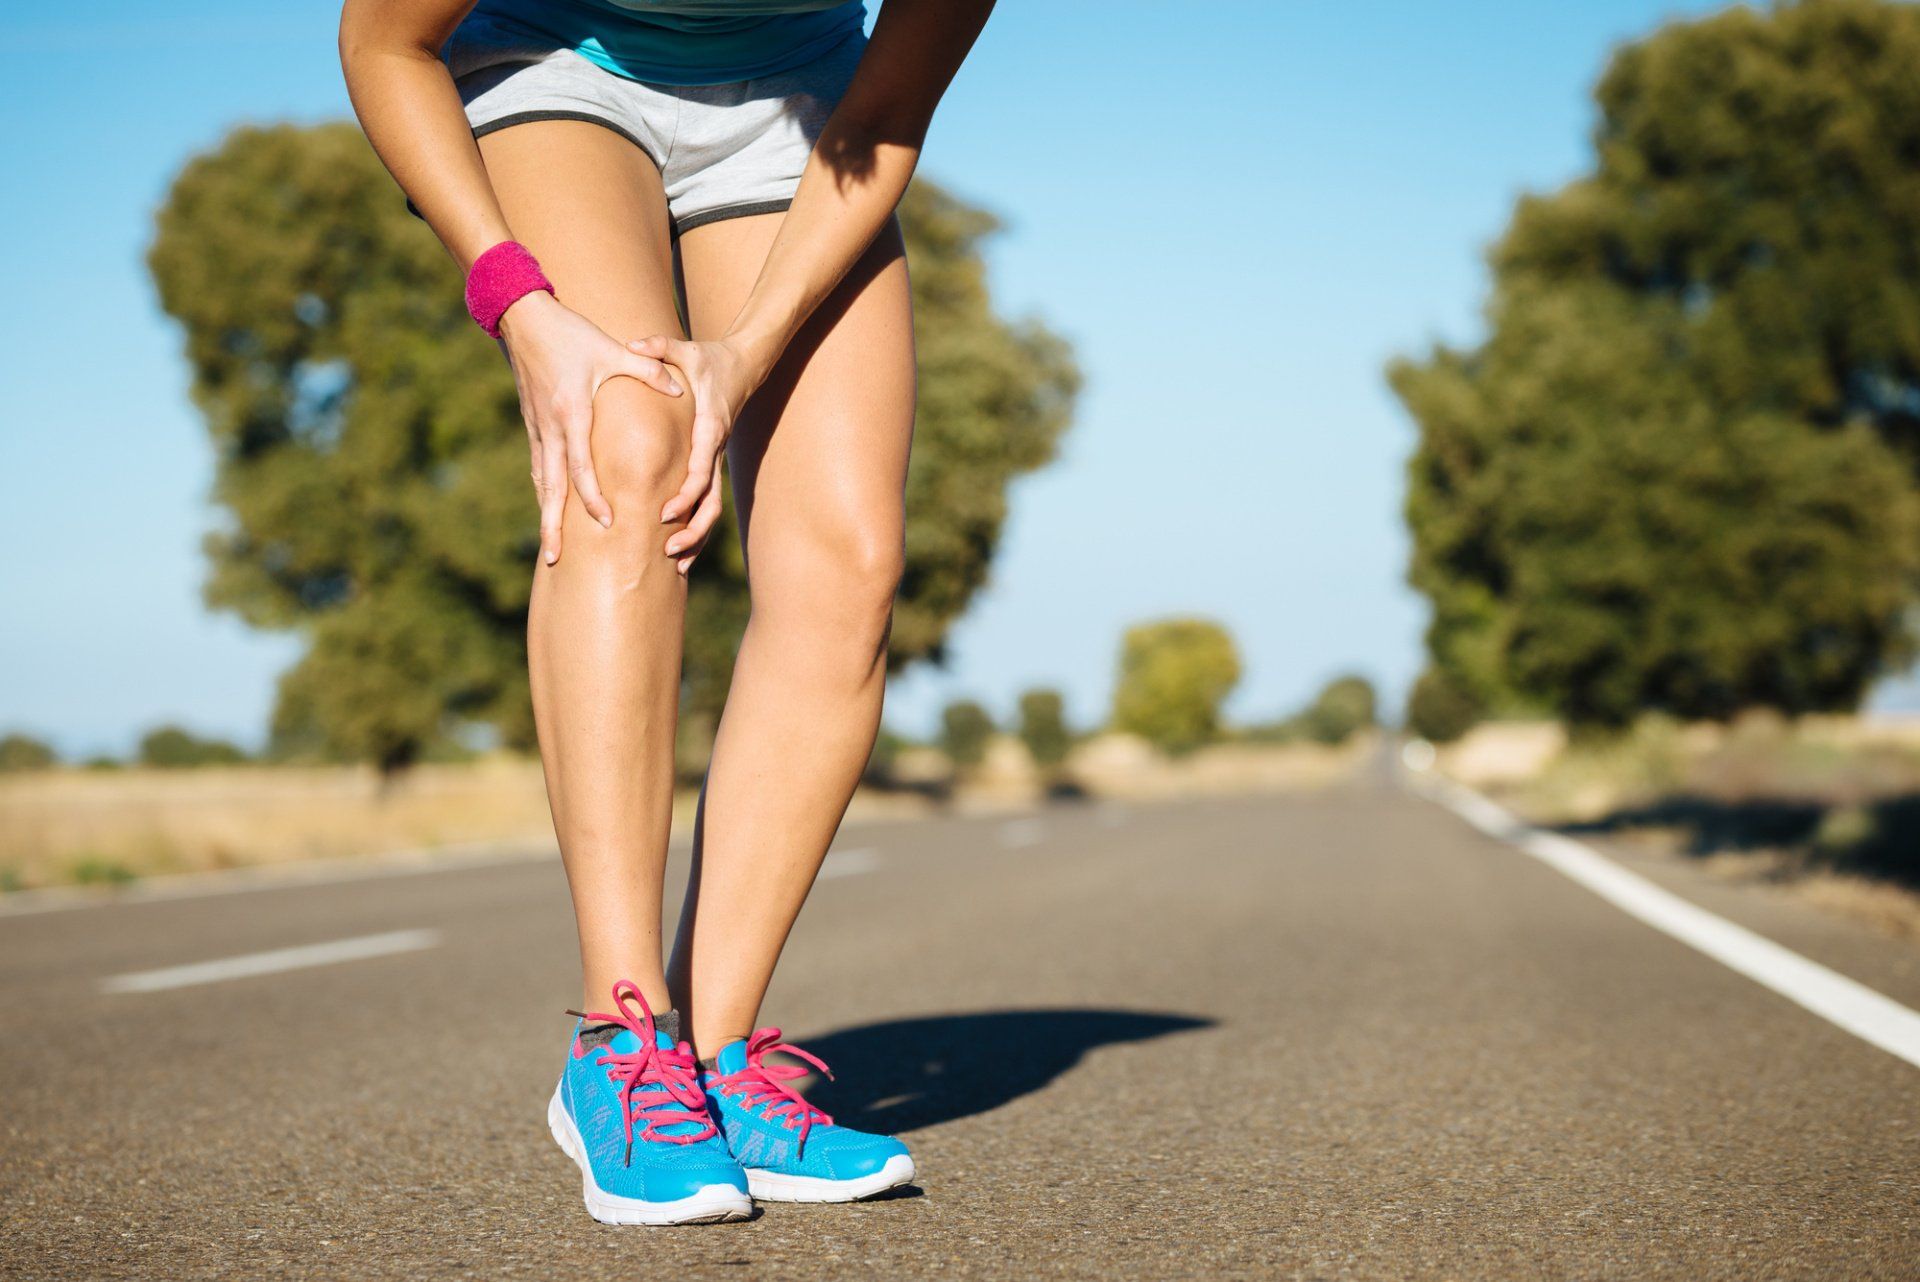 lady with injured knee stops while running